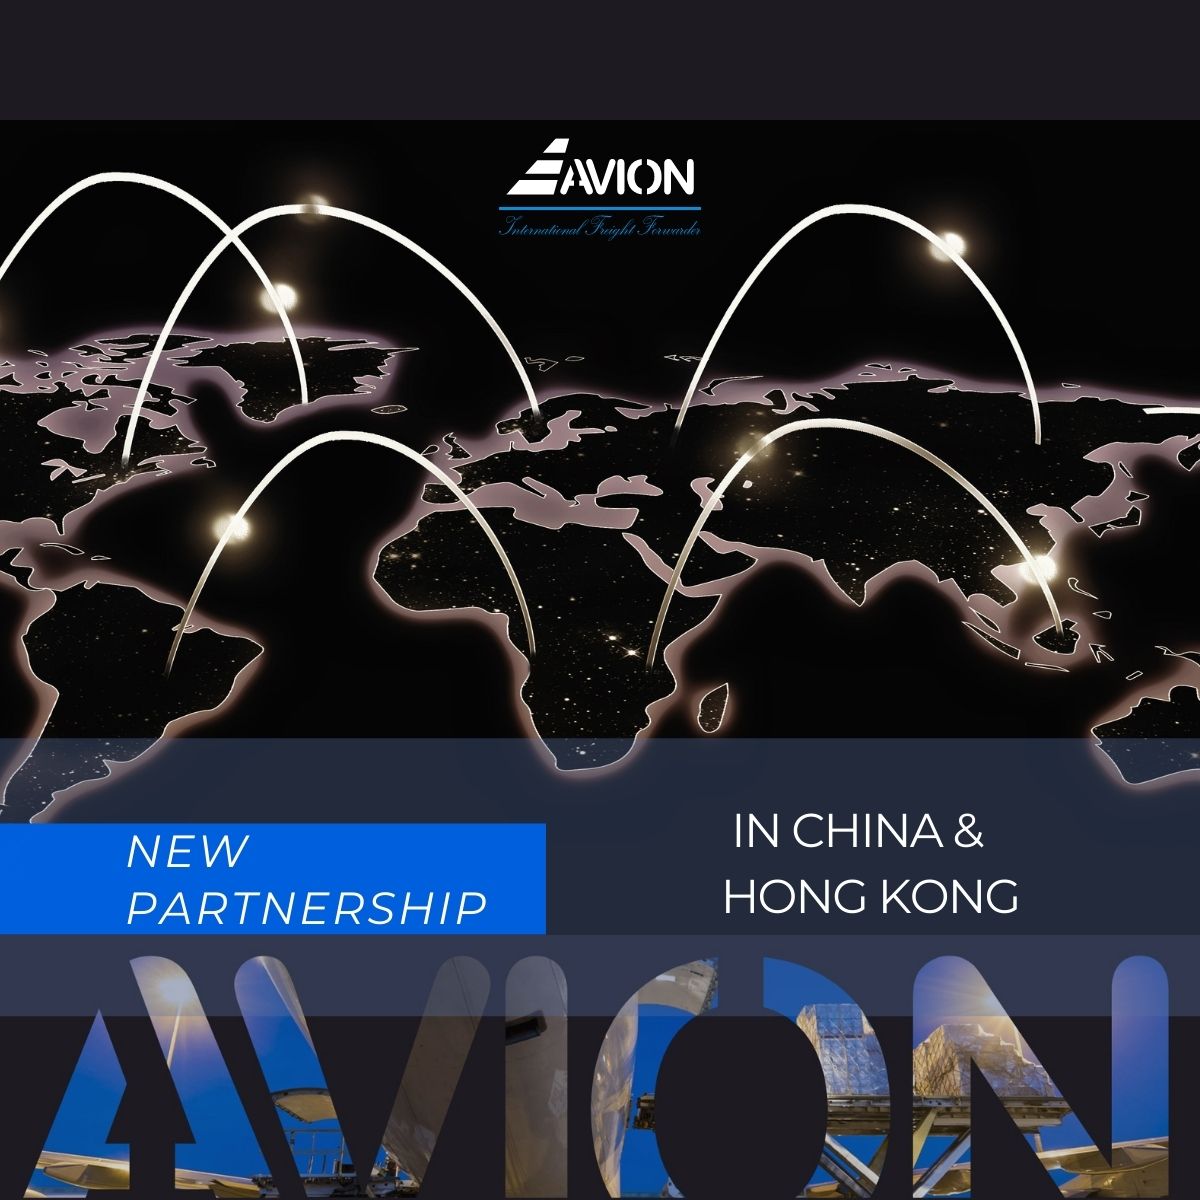 Avion in partnership with Unitex Int’l Forwarding Limited